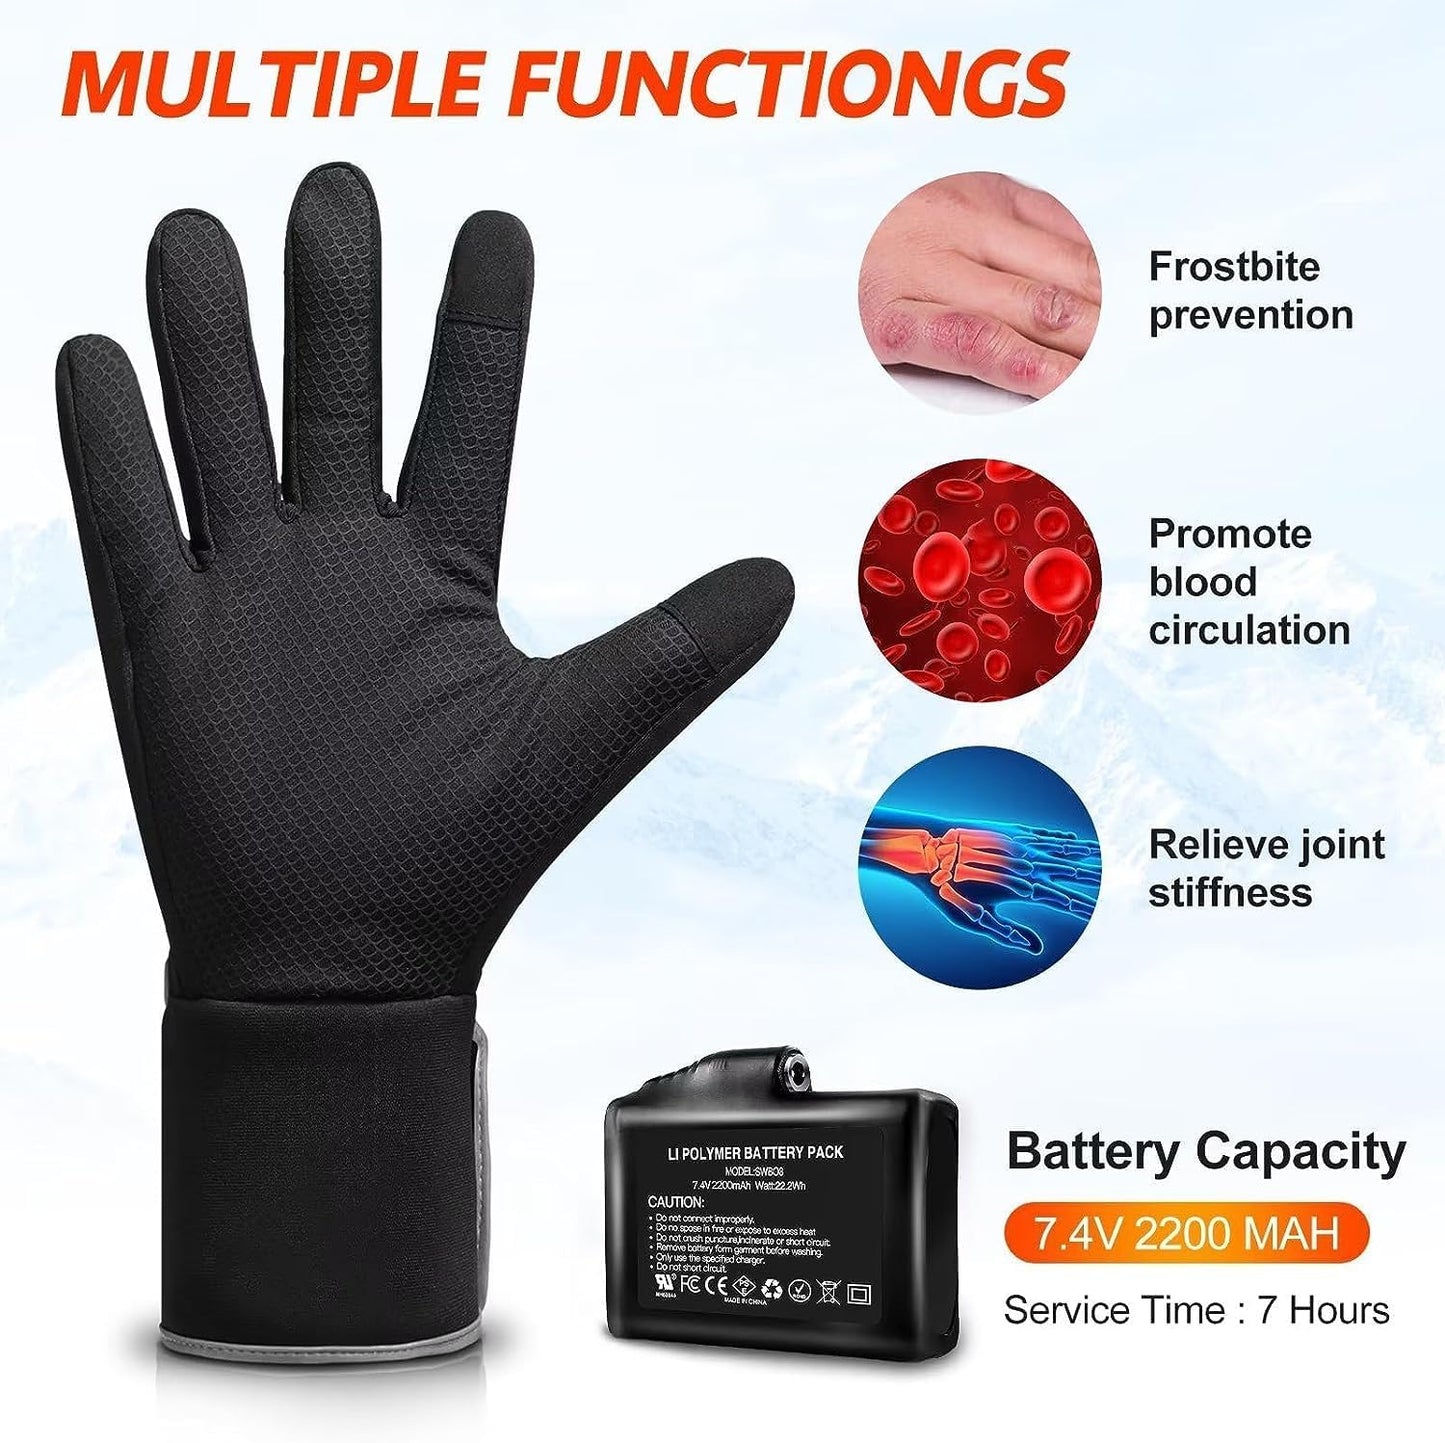 Heated Gloves Rechargeable Electric Battery - Breathable Heated Gloves Liners for Men Women,Winter Heated Thin Gloves Touchscreen Riding Skiing Snowboarding Hiking Cycling Hunting Hand Warmer